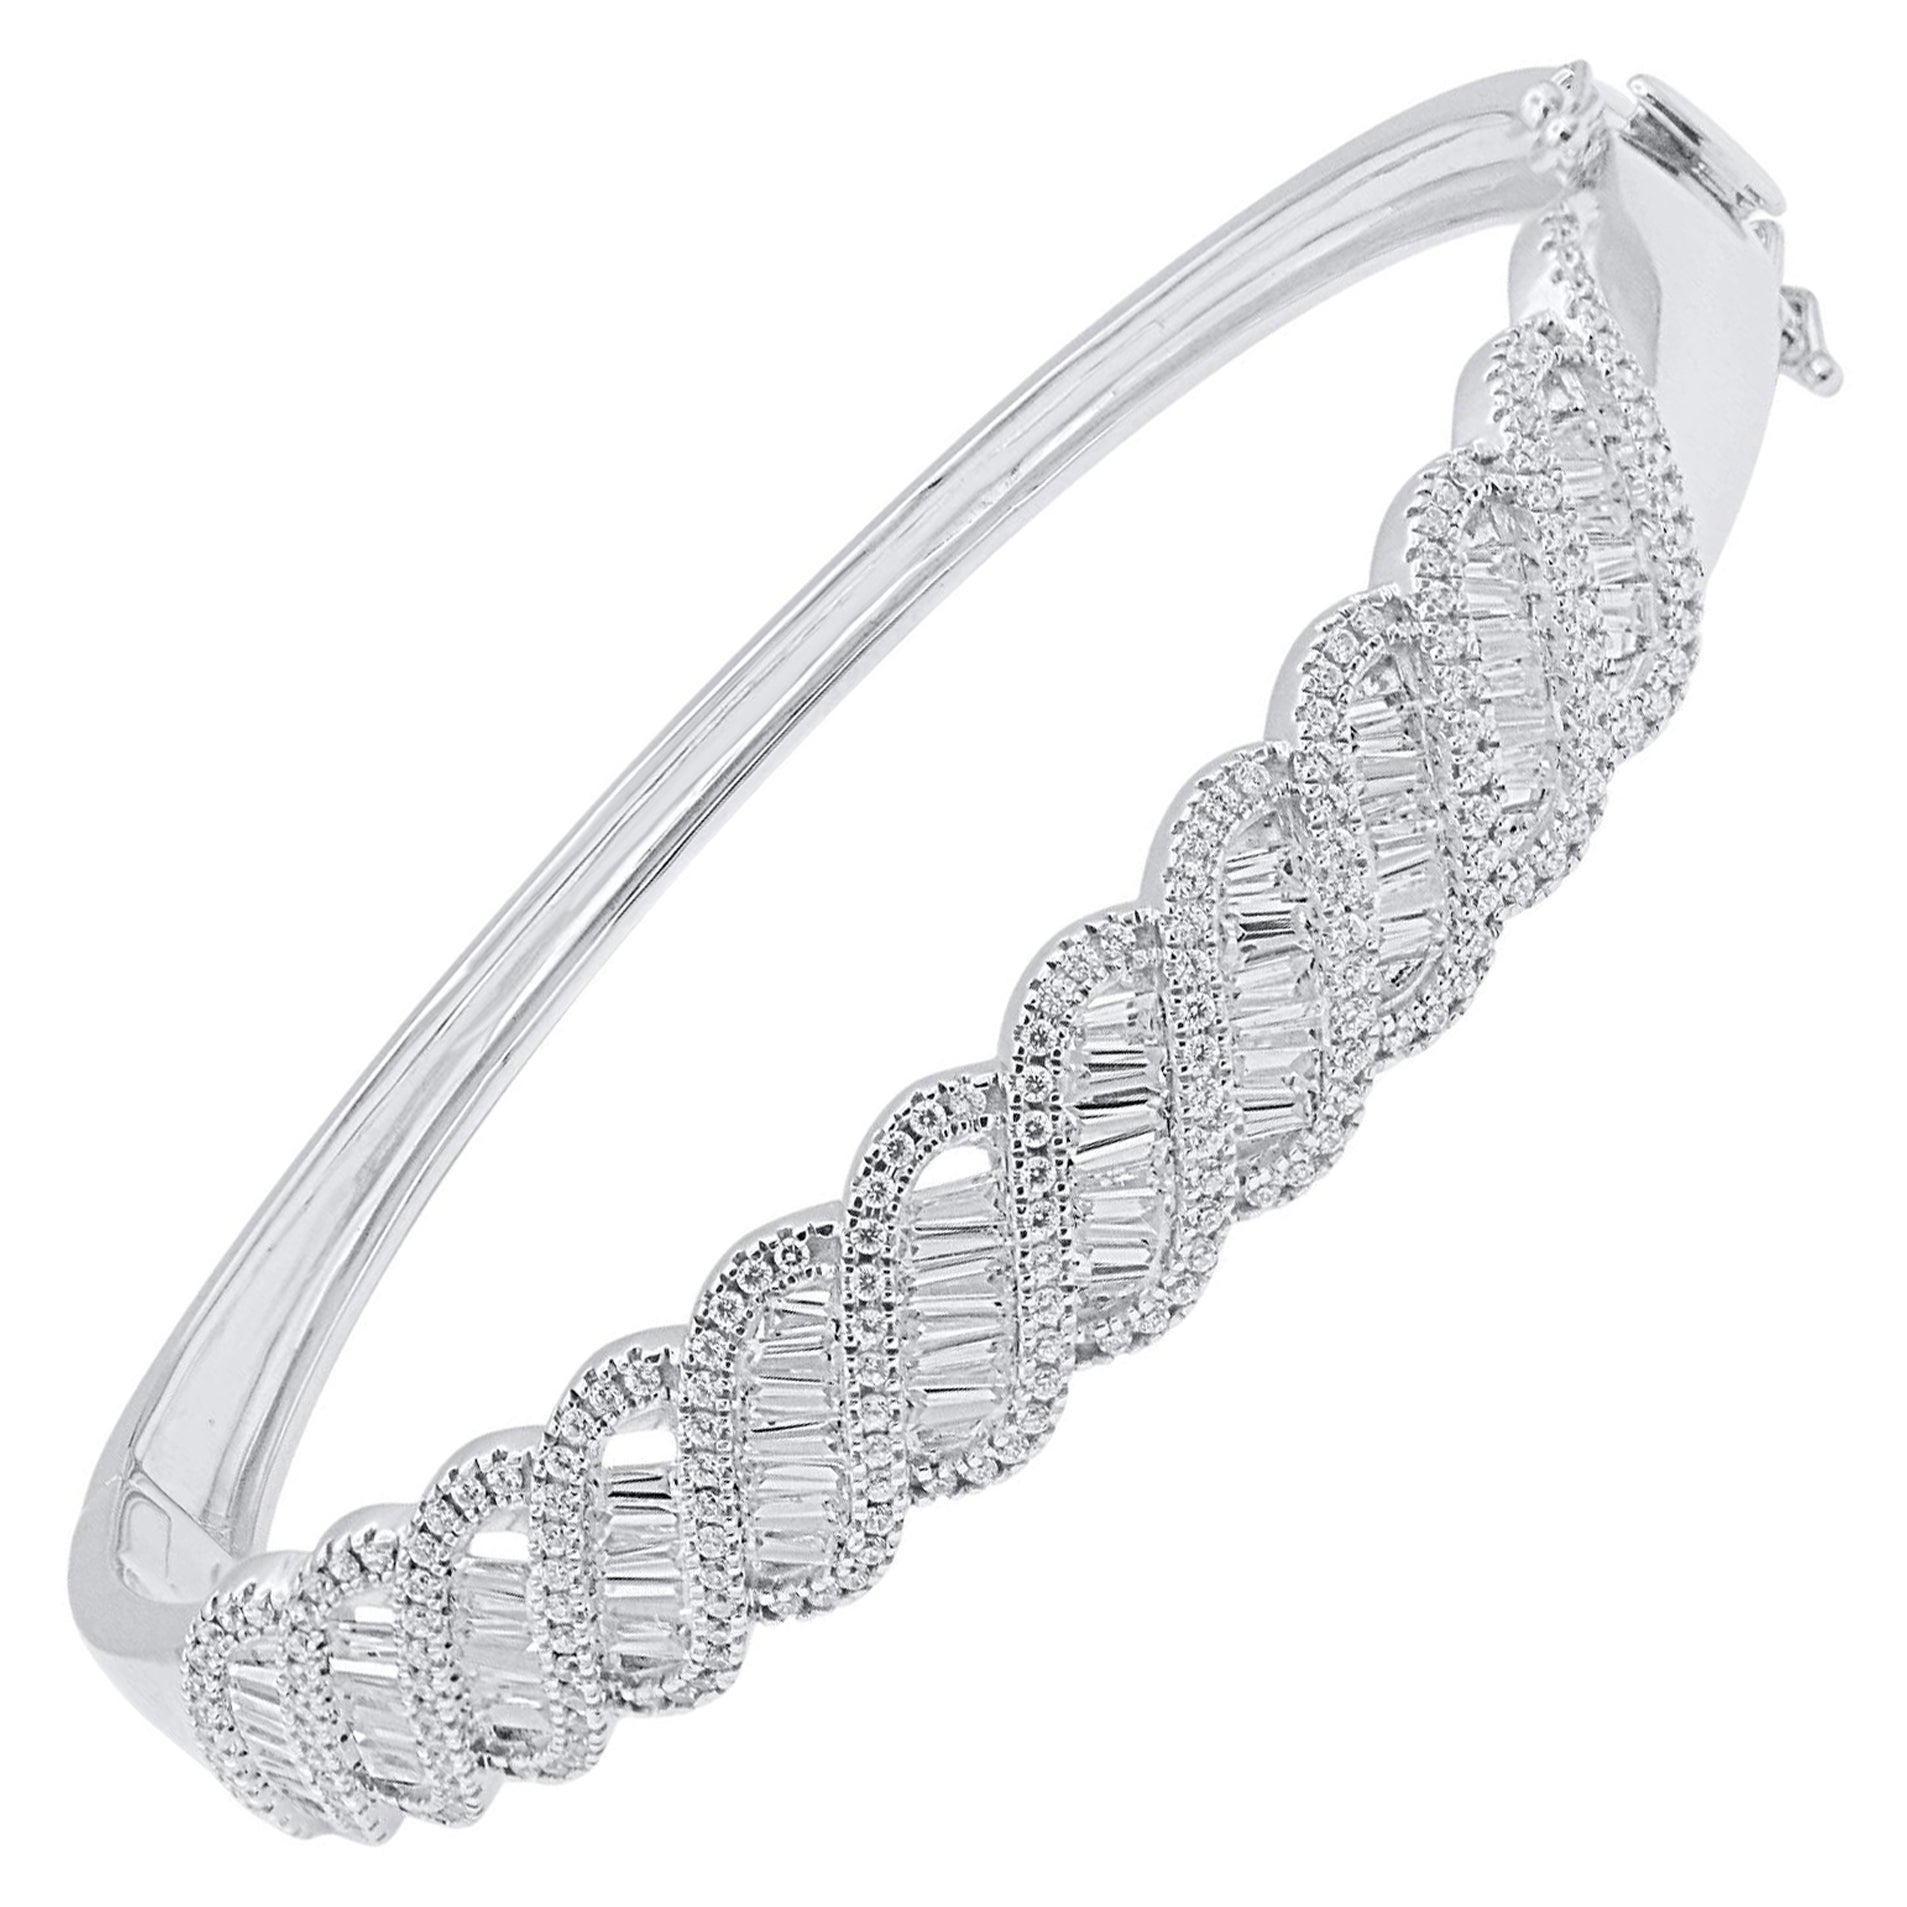 Classic and sophisticated, this diamond bangle bracelet pairs well with any attire.
This Shimmering bangle features 267 natural single cut & baguette diamonds in prong and Channel setting and crafted in 14 kt white gold. Diamonds are graded H-I